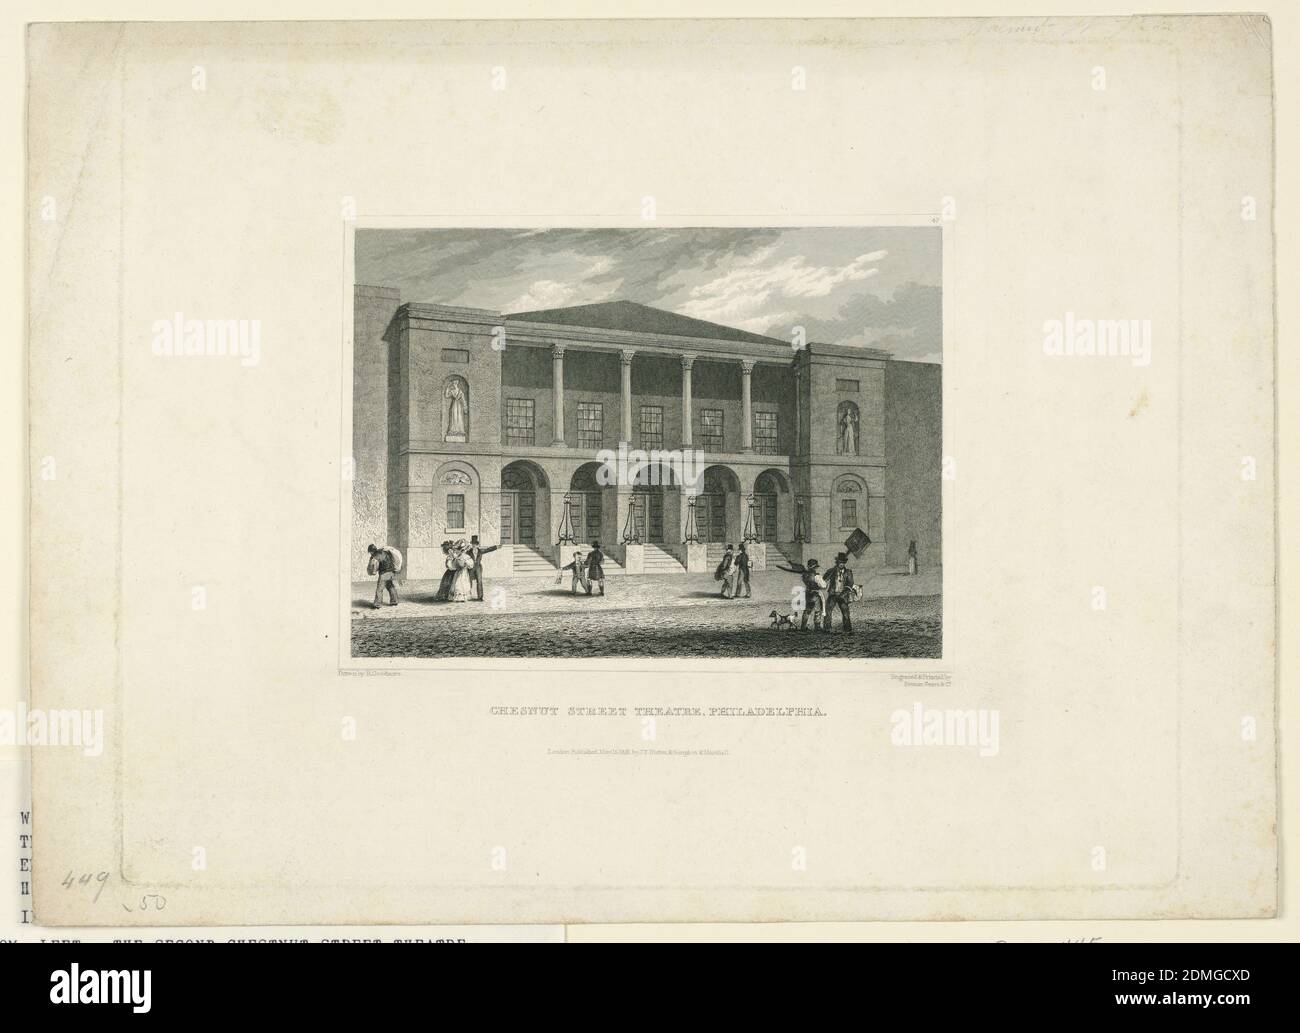 Second Chestnut Street Theater, Philadelphia, R. Goodacre, Engraving on paper, Horizontal rectangle. Oblique view of the theater. Persons in the street. Caption similar to 1938-57-1409, except for the number '47.' 'Drawn by R. Goodacre CHESTNUT STREET THEATRE, PHILADELPHIA', Europe and USA, 1831, Print Stock Photo